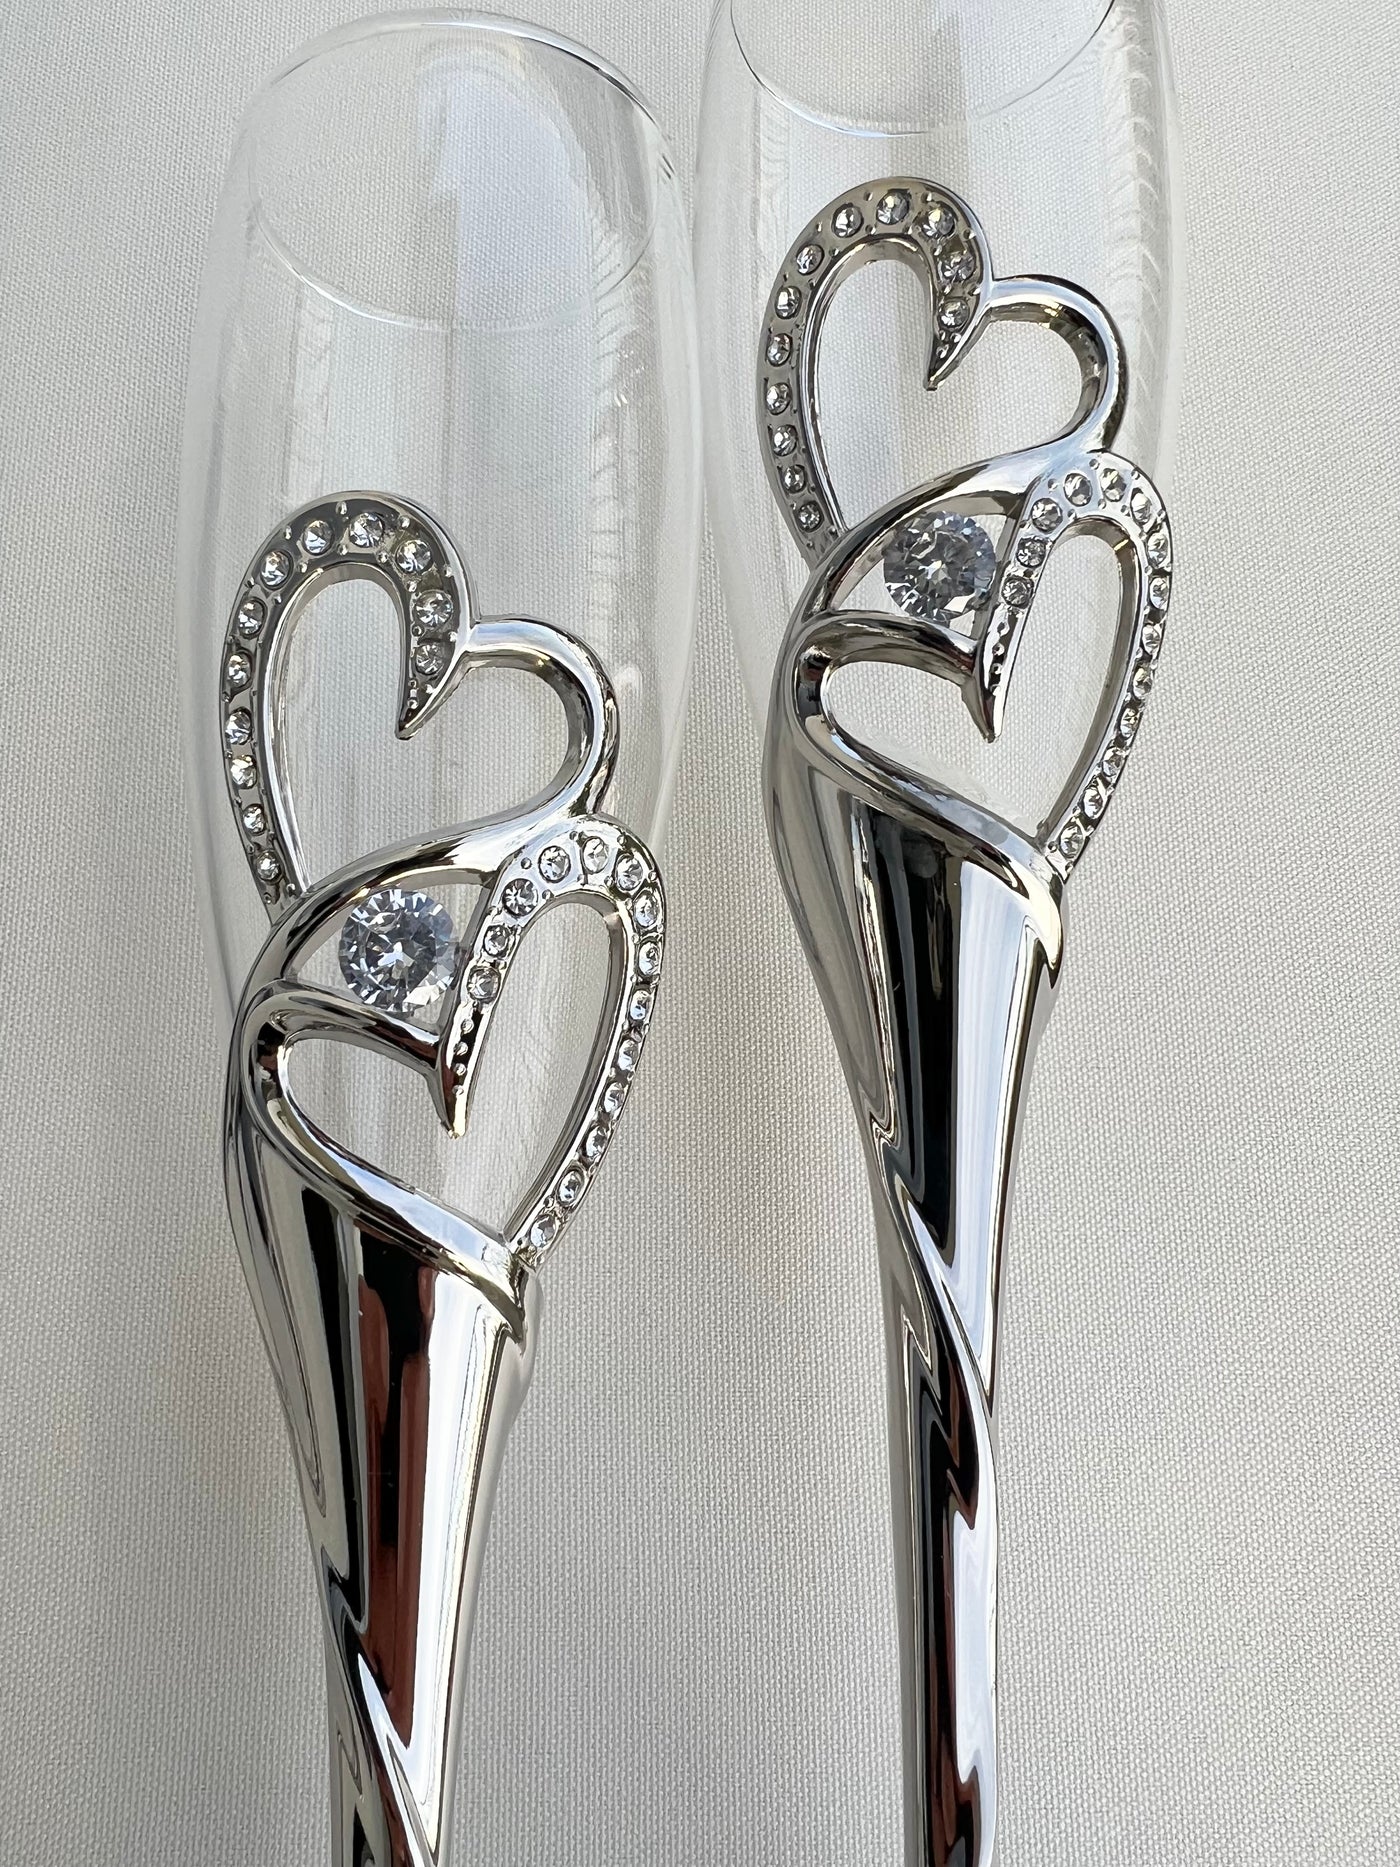 Toasting Glass and Servers for Bridal and Wedding, Heart Cake Cutting Set by Lucky Collections